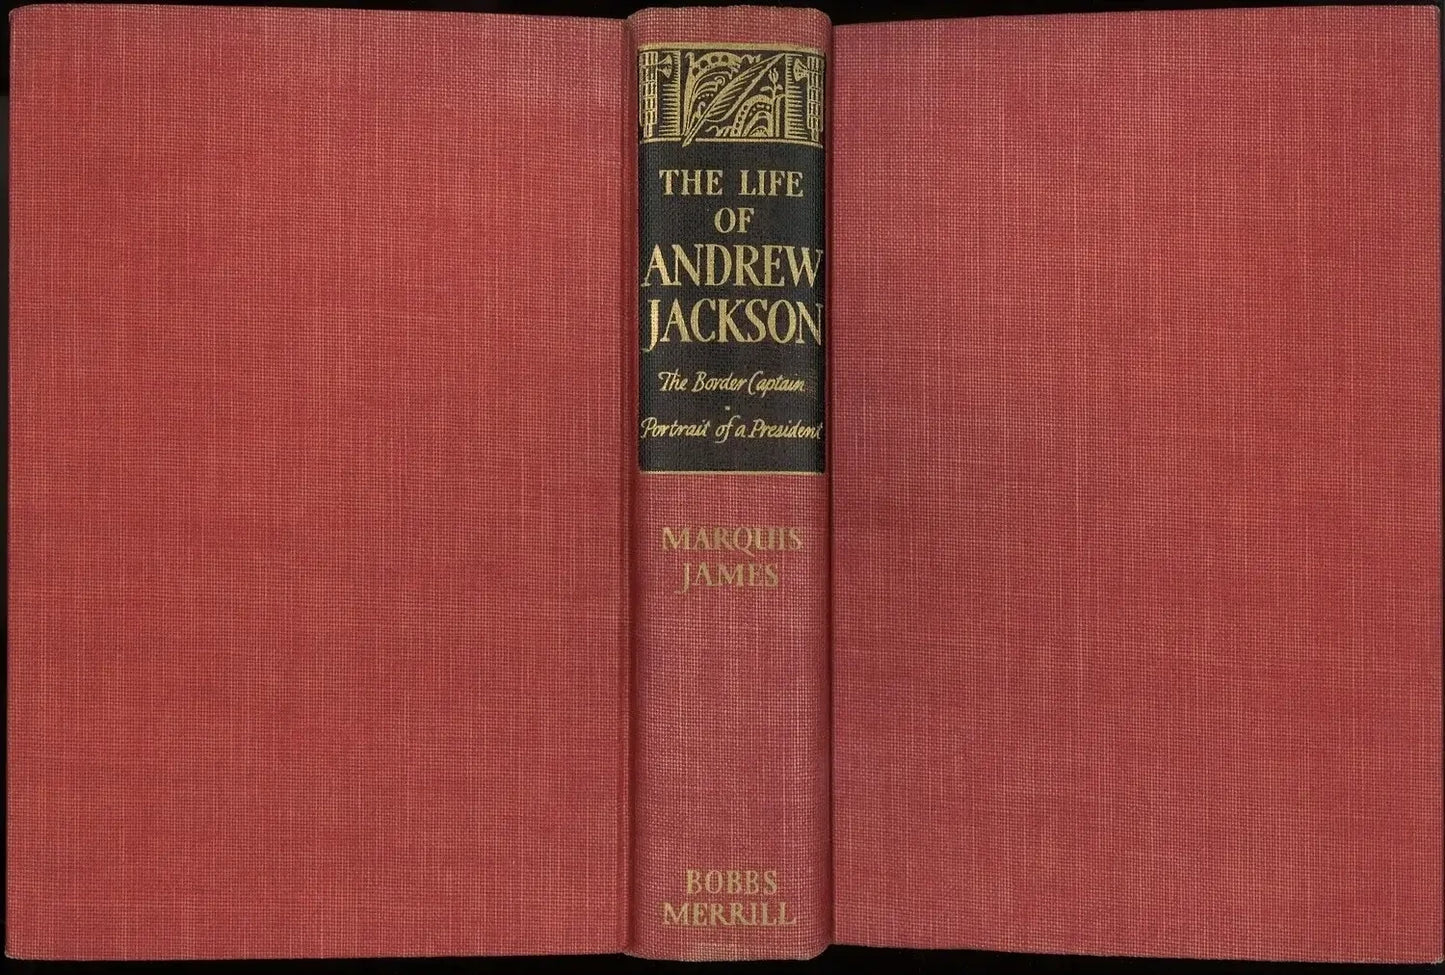 The Life of Andrew Jackson (Complete in 1 Volume), Marquis James